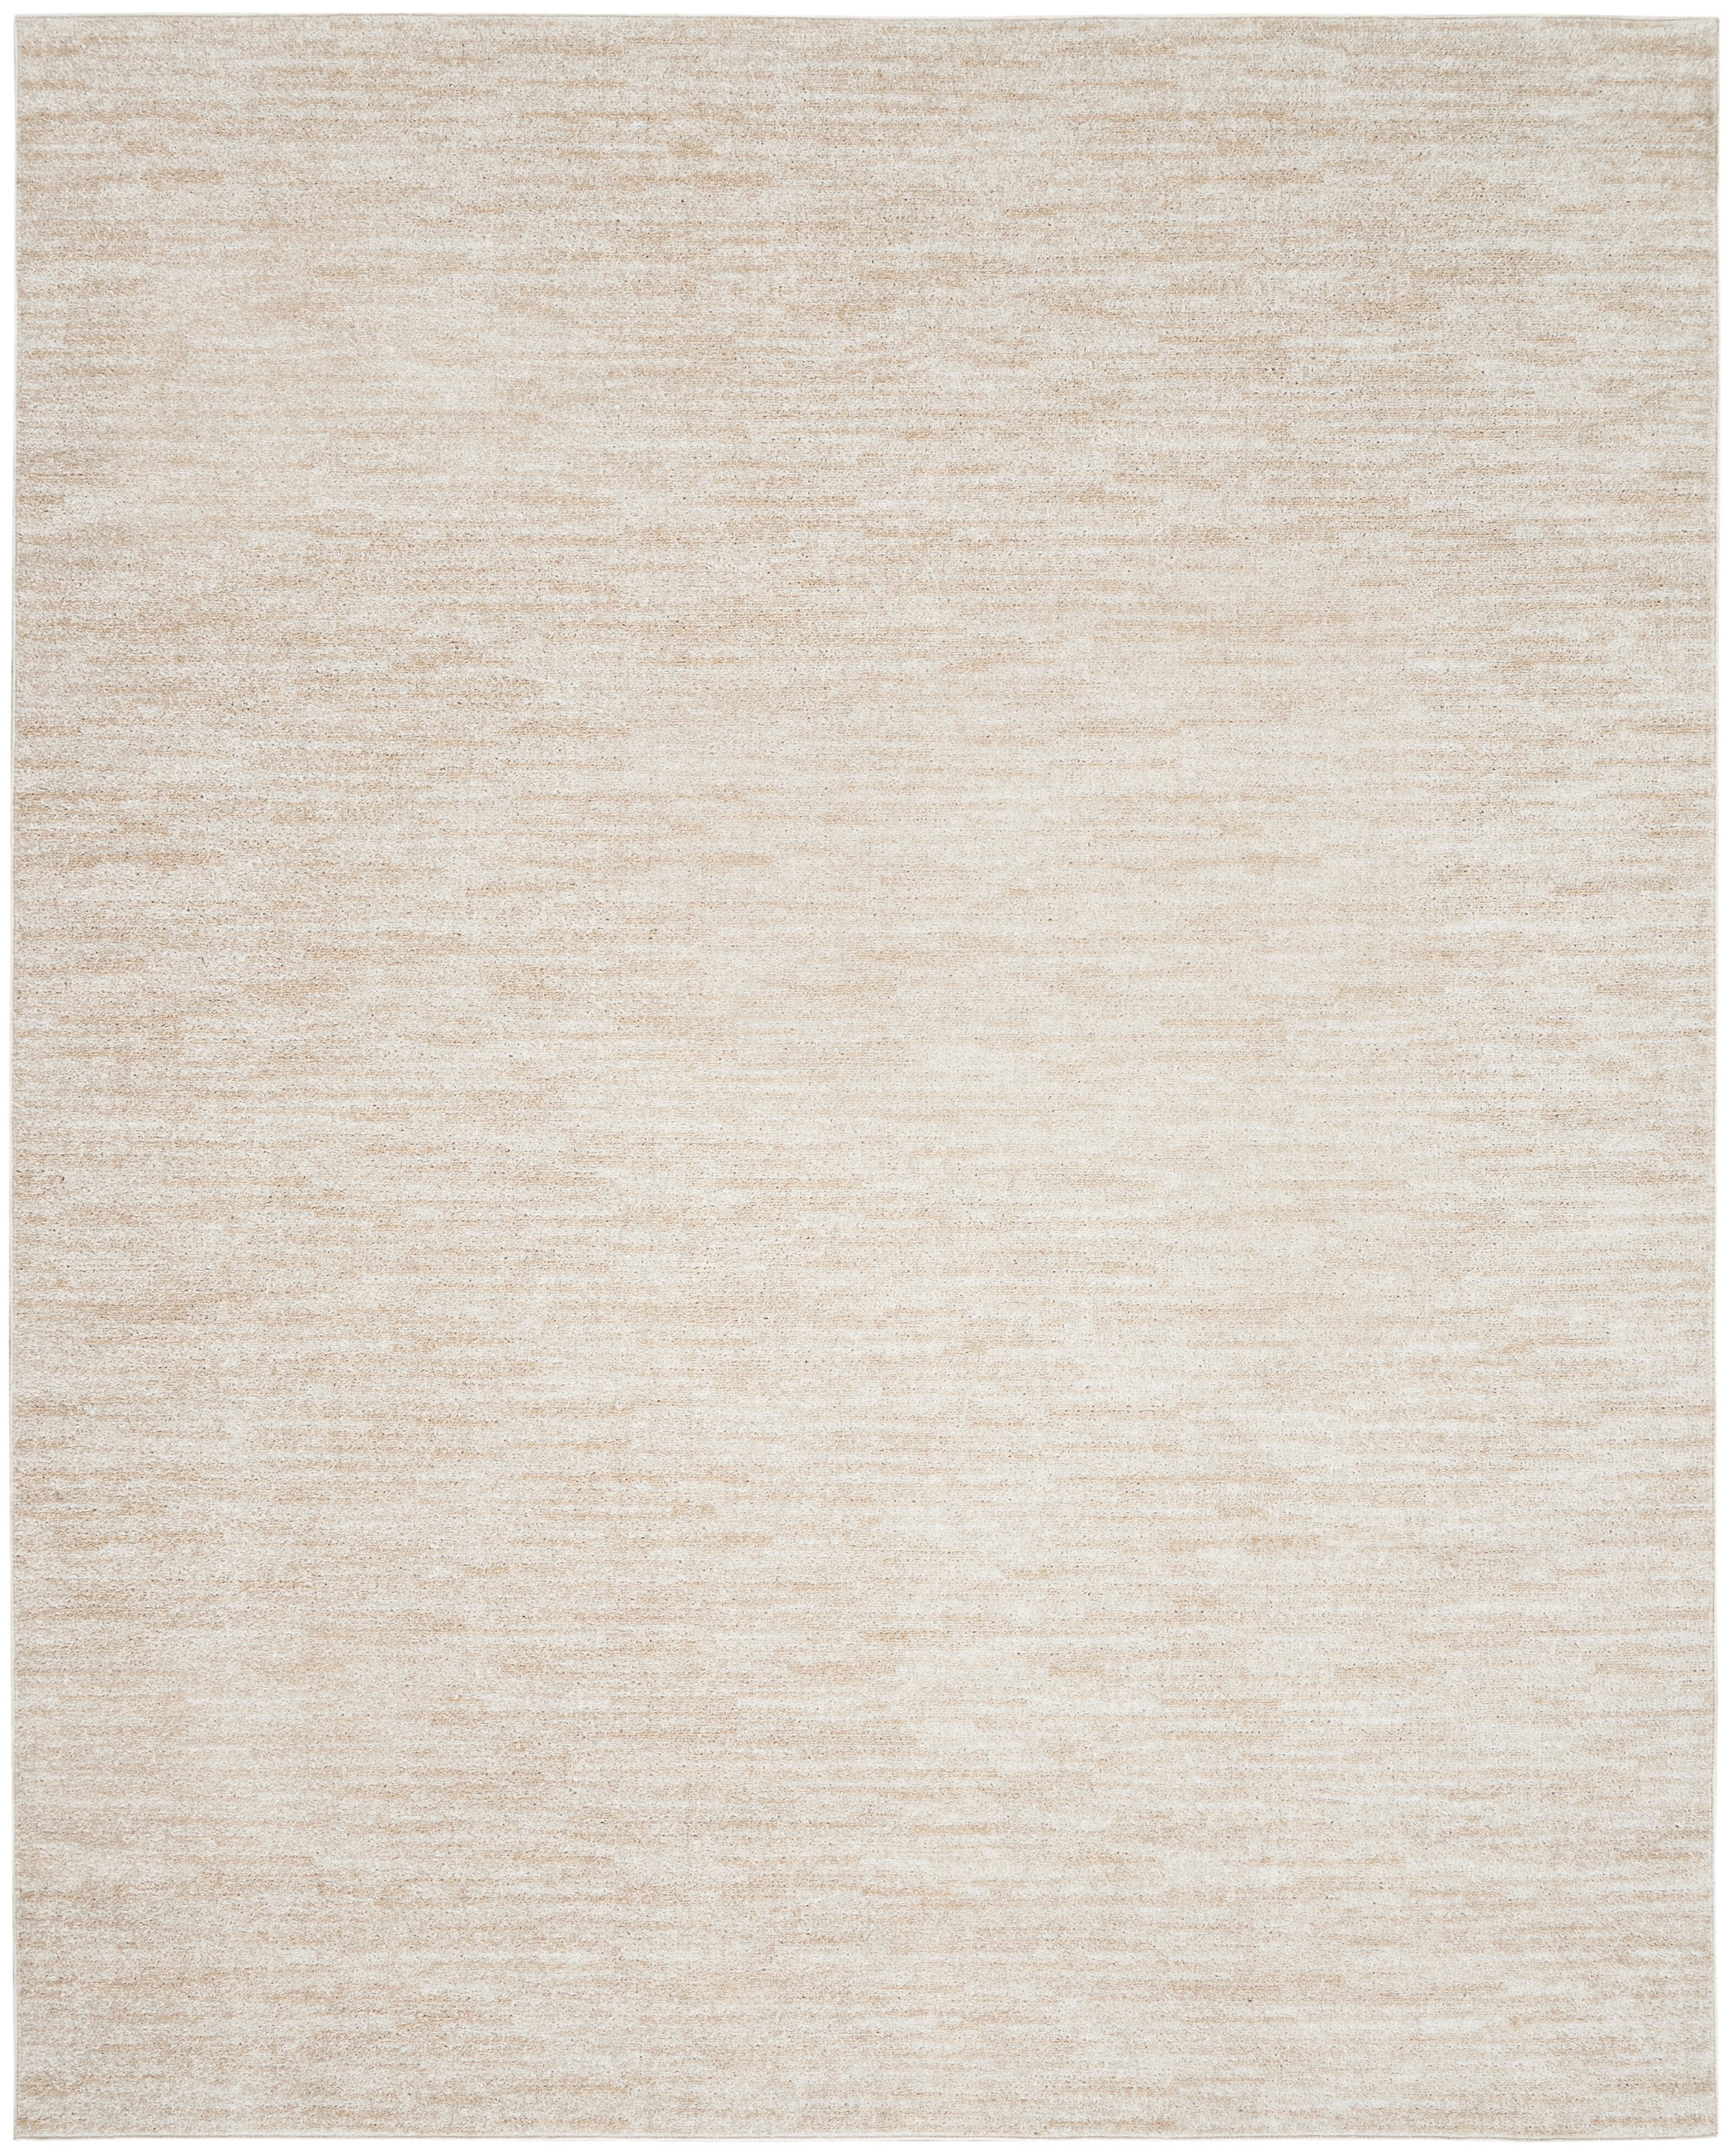 SK40 5-Feet 10-Inches by 8-Feet 10-Inches 5'10 x 8'10 Nourison Nourmak Rust Rectangle Area Rug